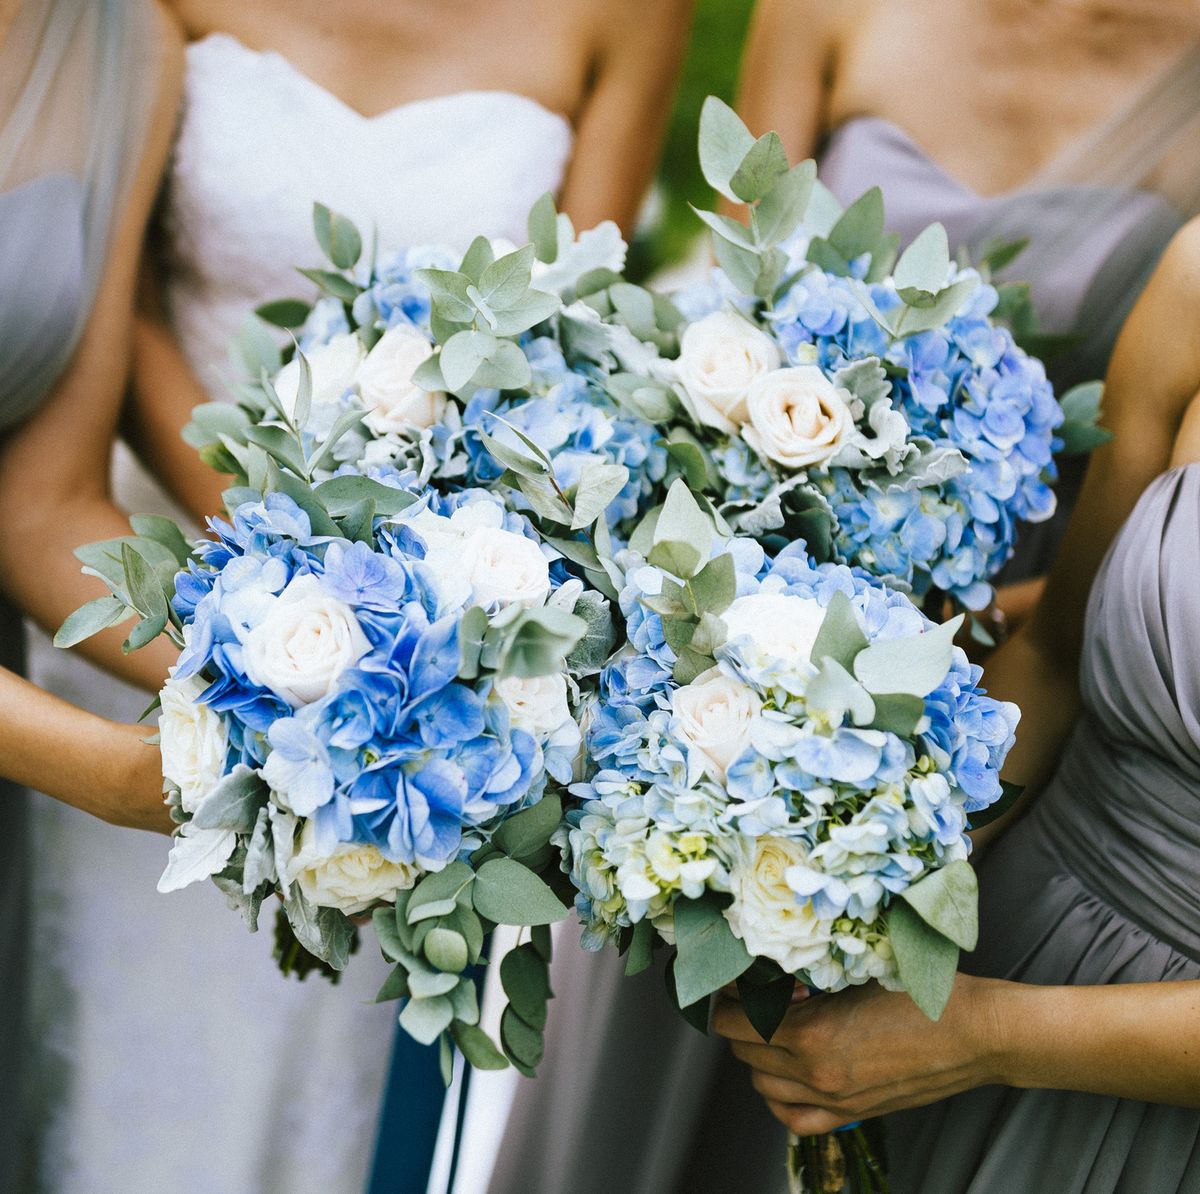 The Origin of Something Old, New, Borrowed, and Blue for Brides